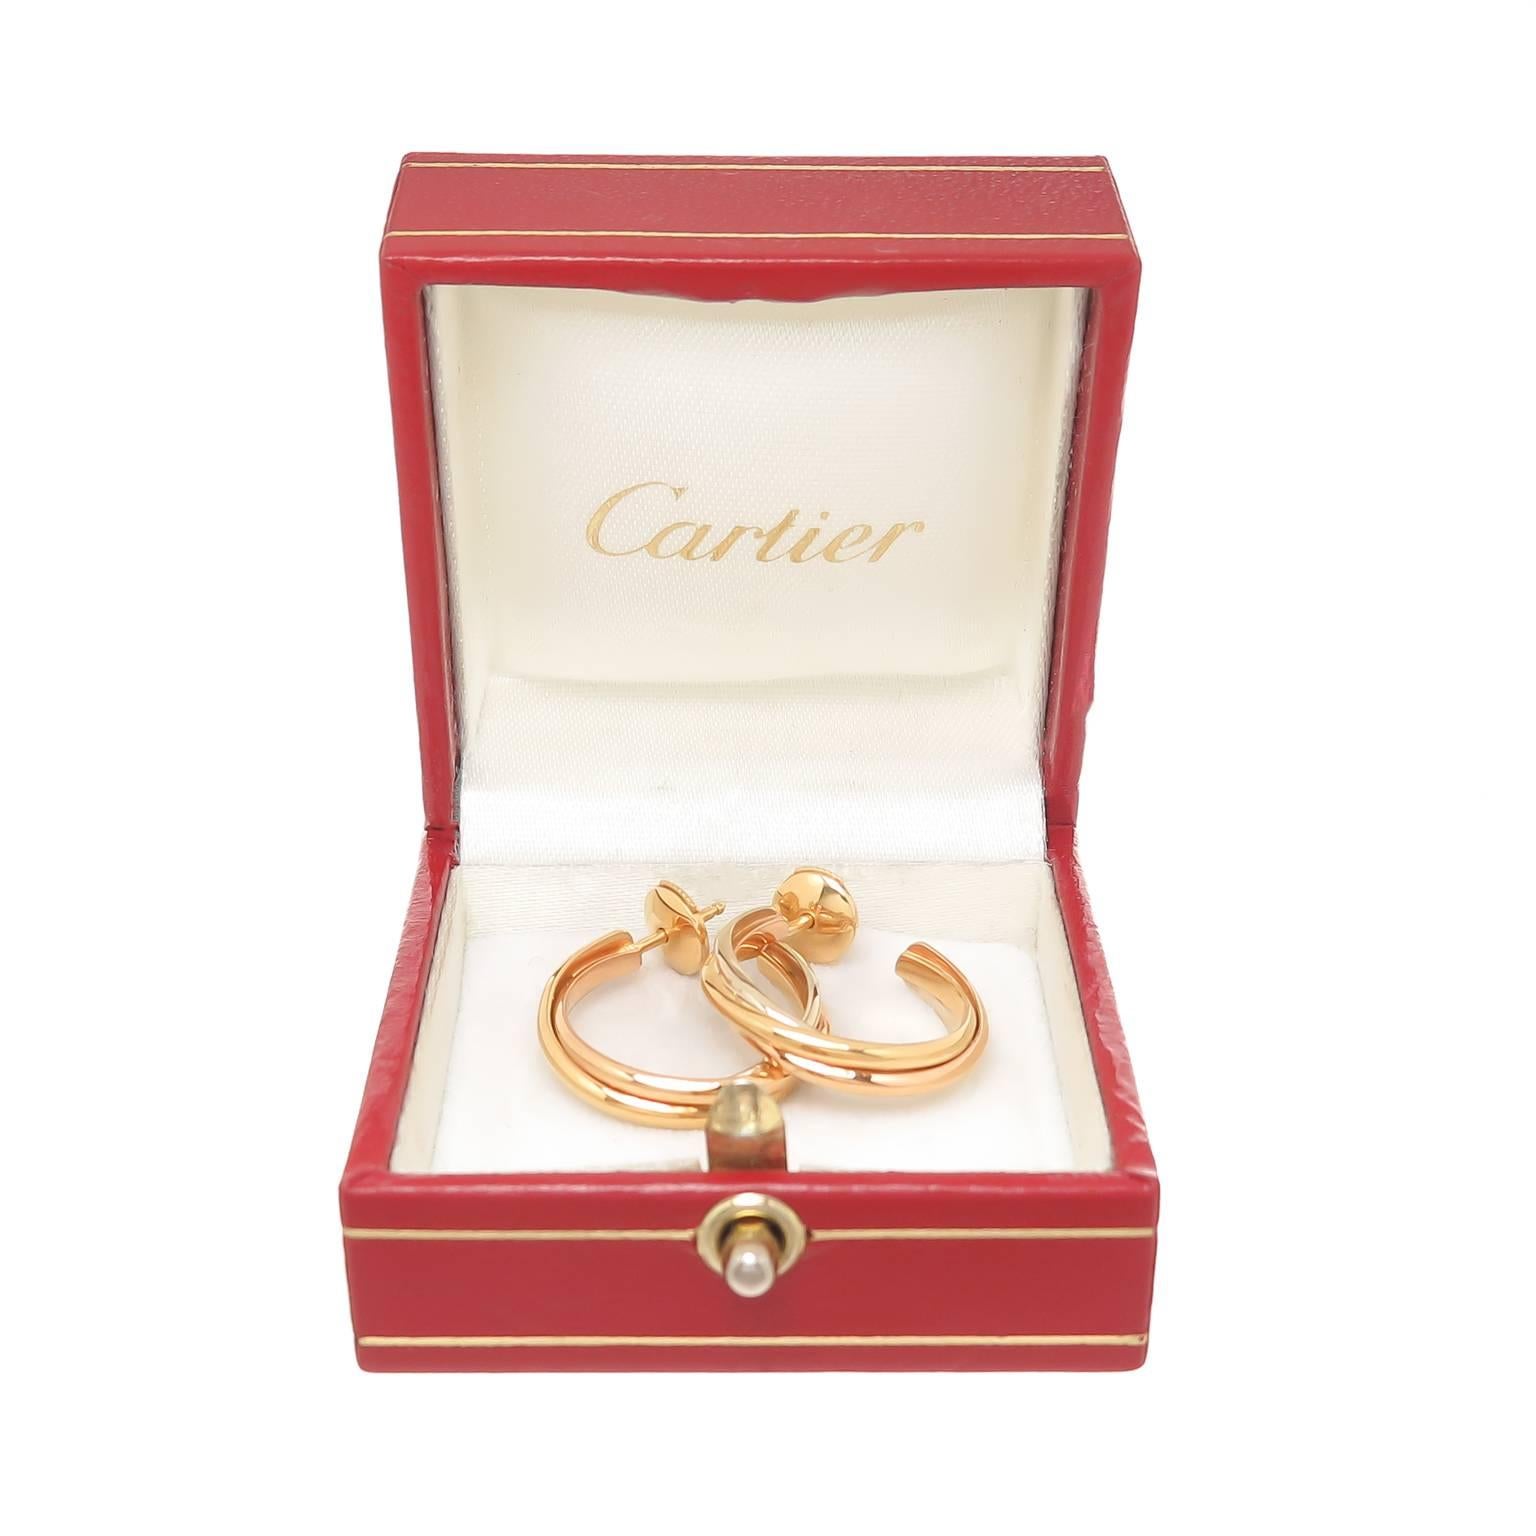 Circa 2005 Cartier Trinity collection 18K White, Yellow and Pink Gold Hoop Earrings, measuring 3/4 inch in diameter and weighing 8 grams. 
signed, numbered and come in a Cartier Gift Box.